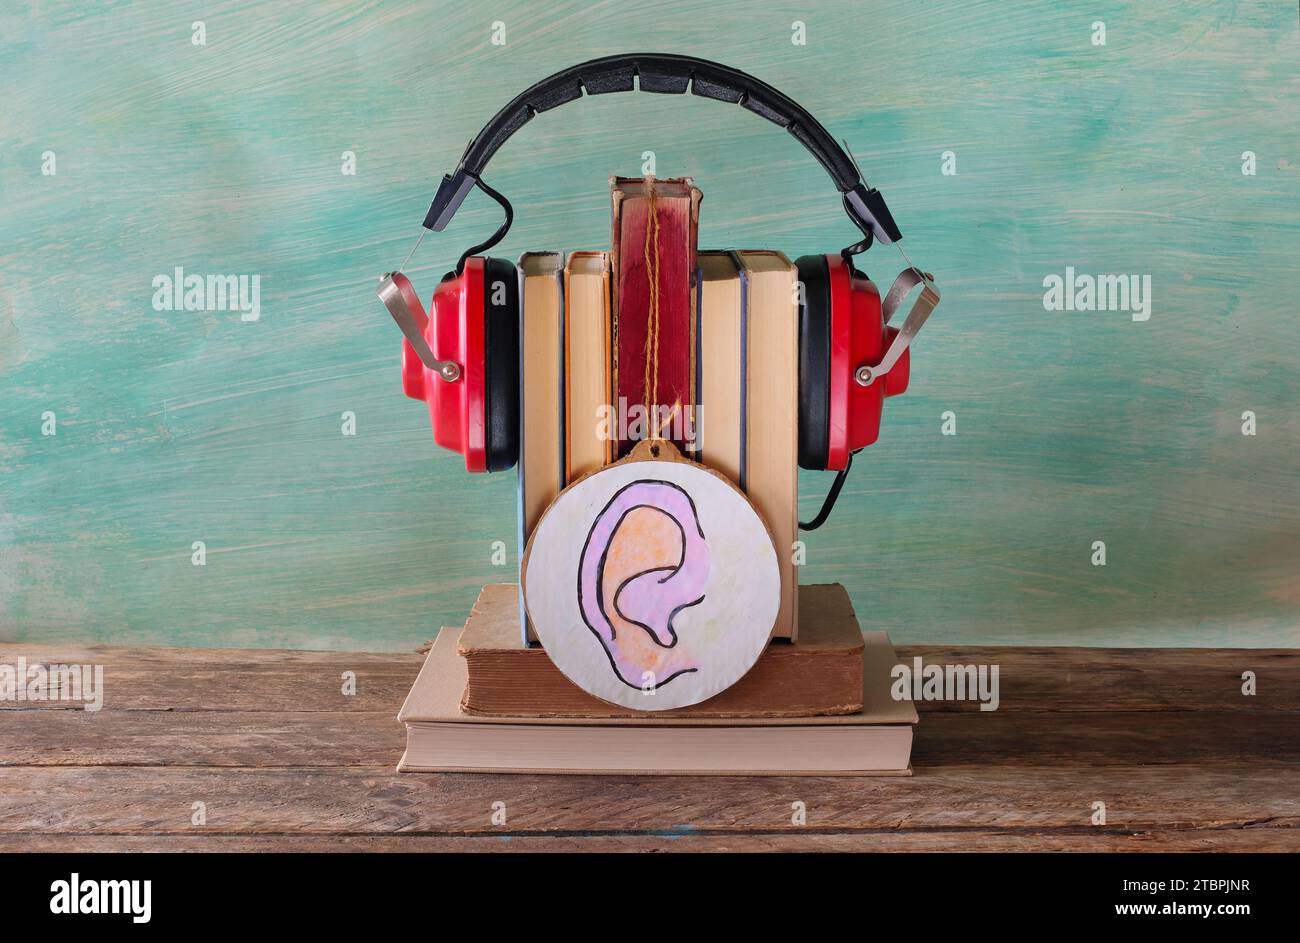 audiobook concept with stack of books, a vinatge headphone and drawing of a human ear, free copy space Stock Photo